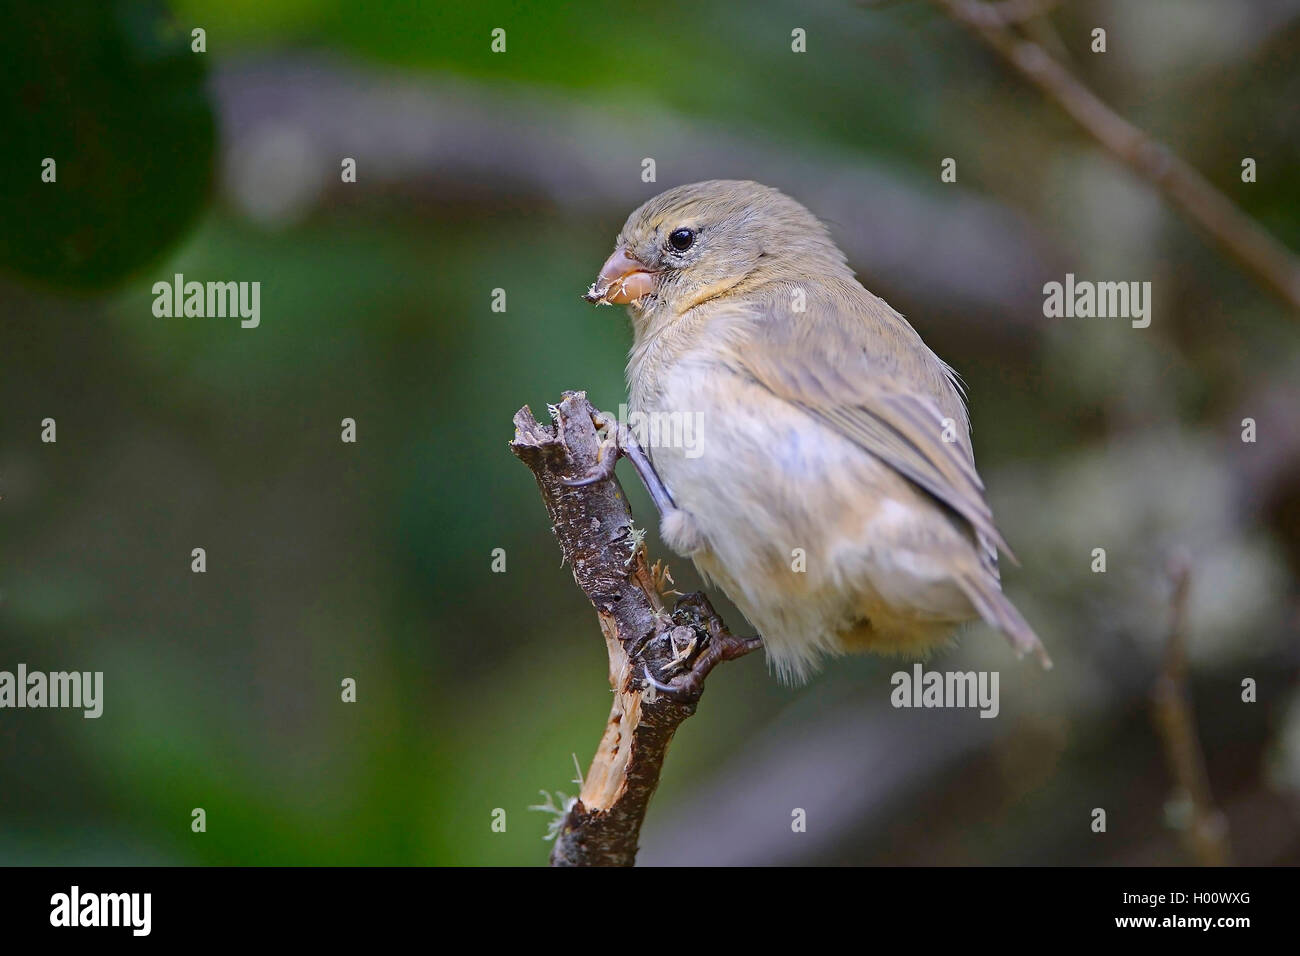 Small insectivorous tree finch, Small tree finch (Camarhynchus parvulus), sitting on a branch, Ecuador, Galapagos Islands, Isabela Stock Photo